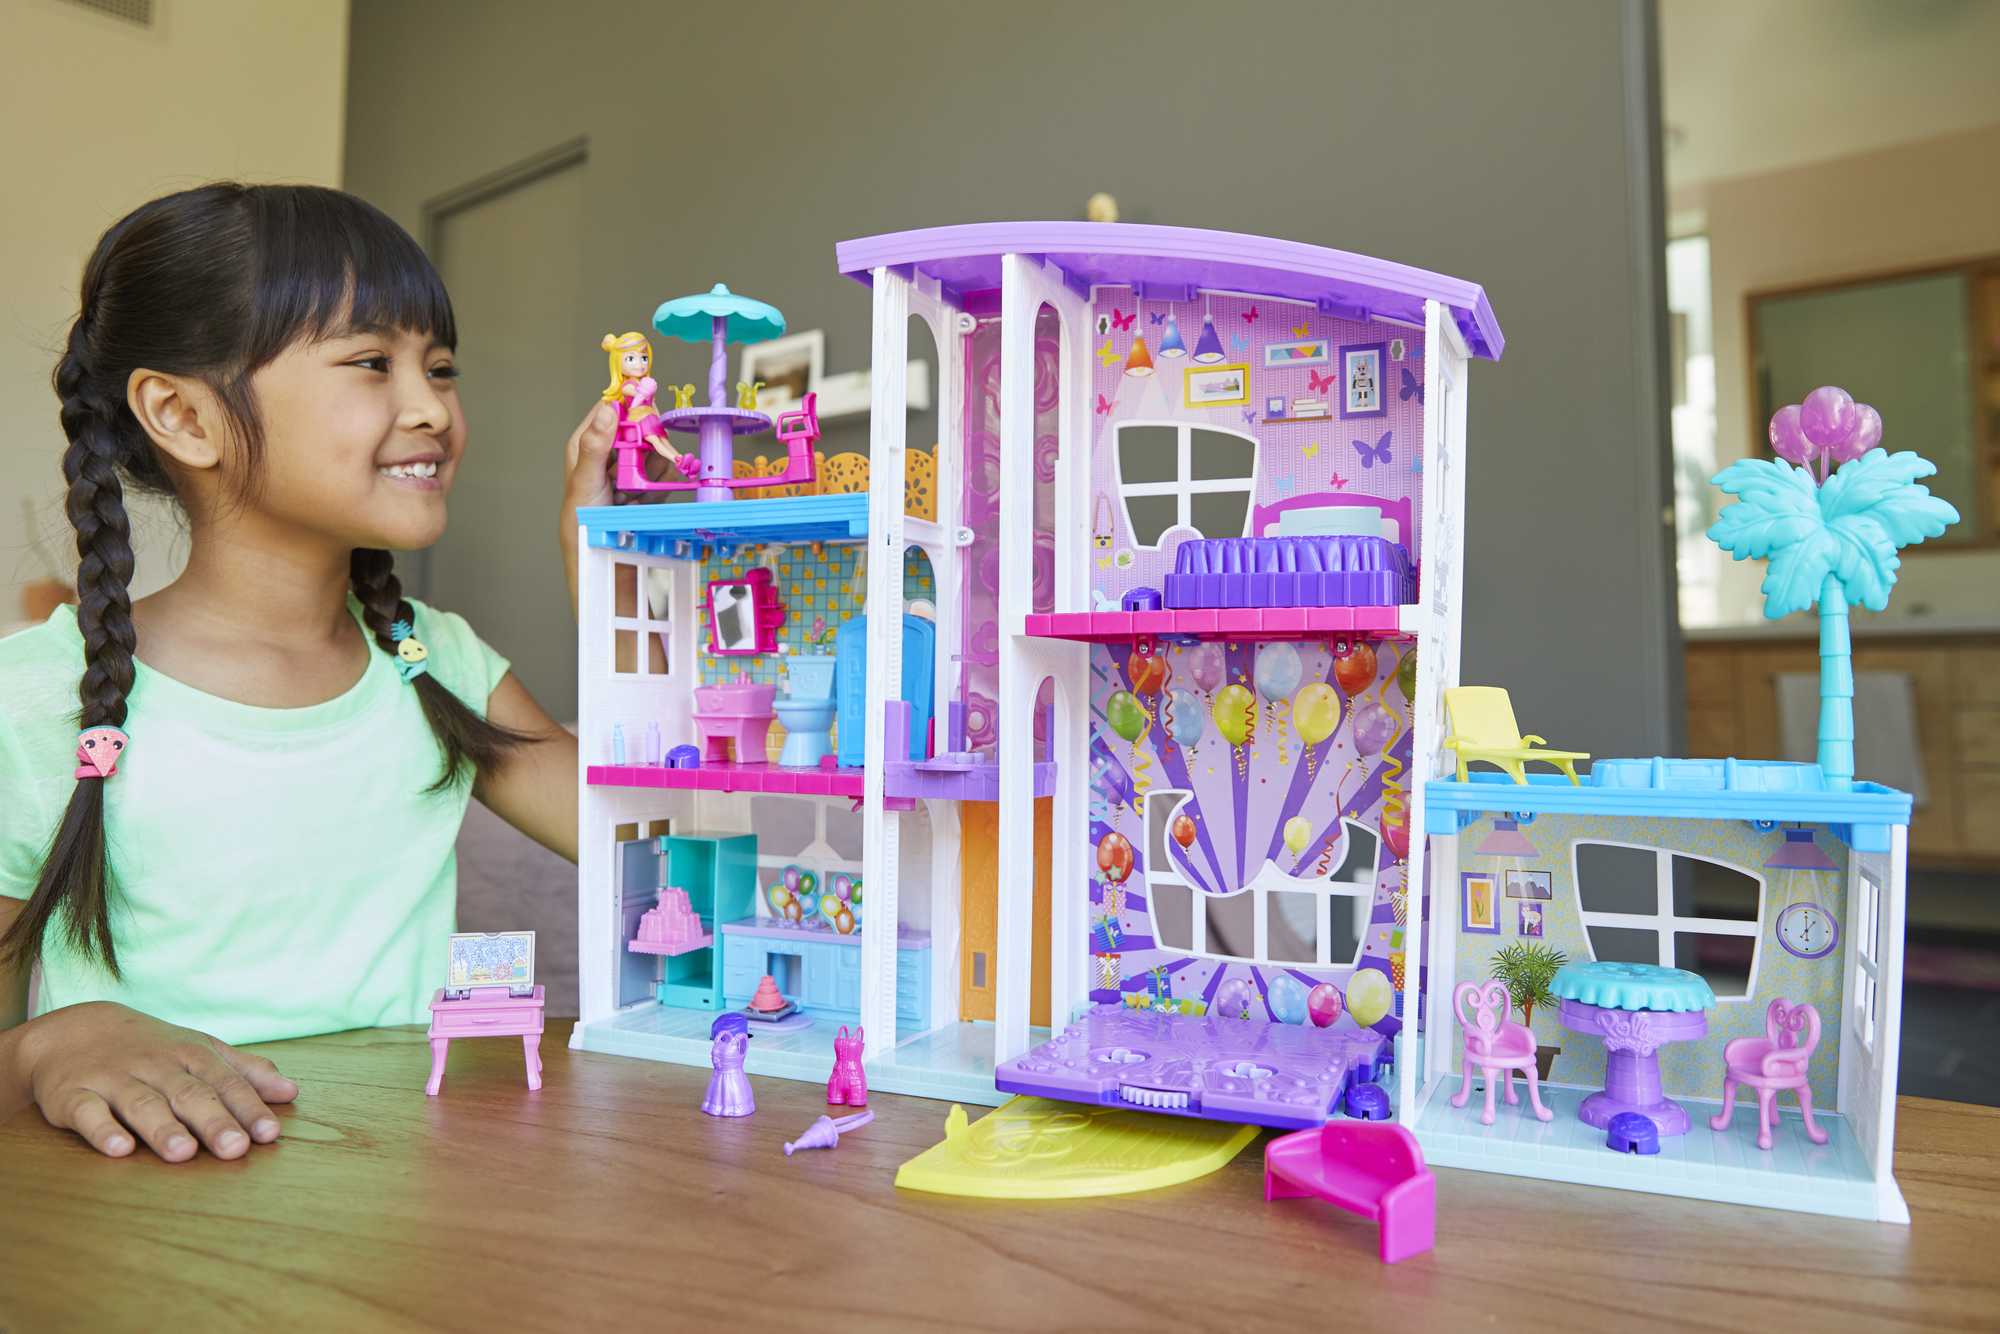 Polly Pocket Poppin' Party Pad Is a Transforming Playhouse! - image 3 of 7